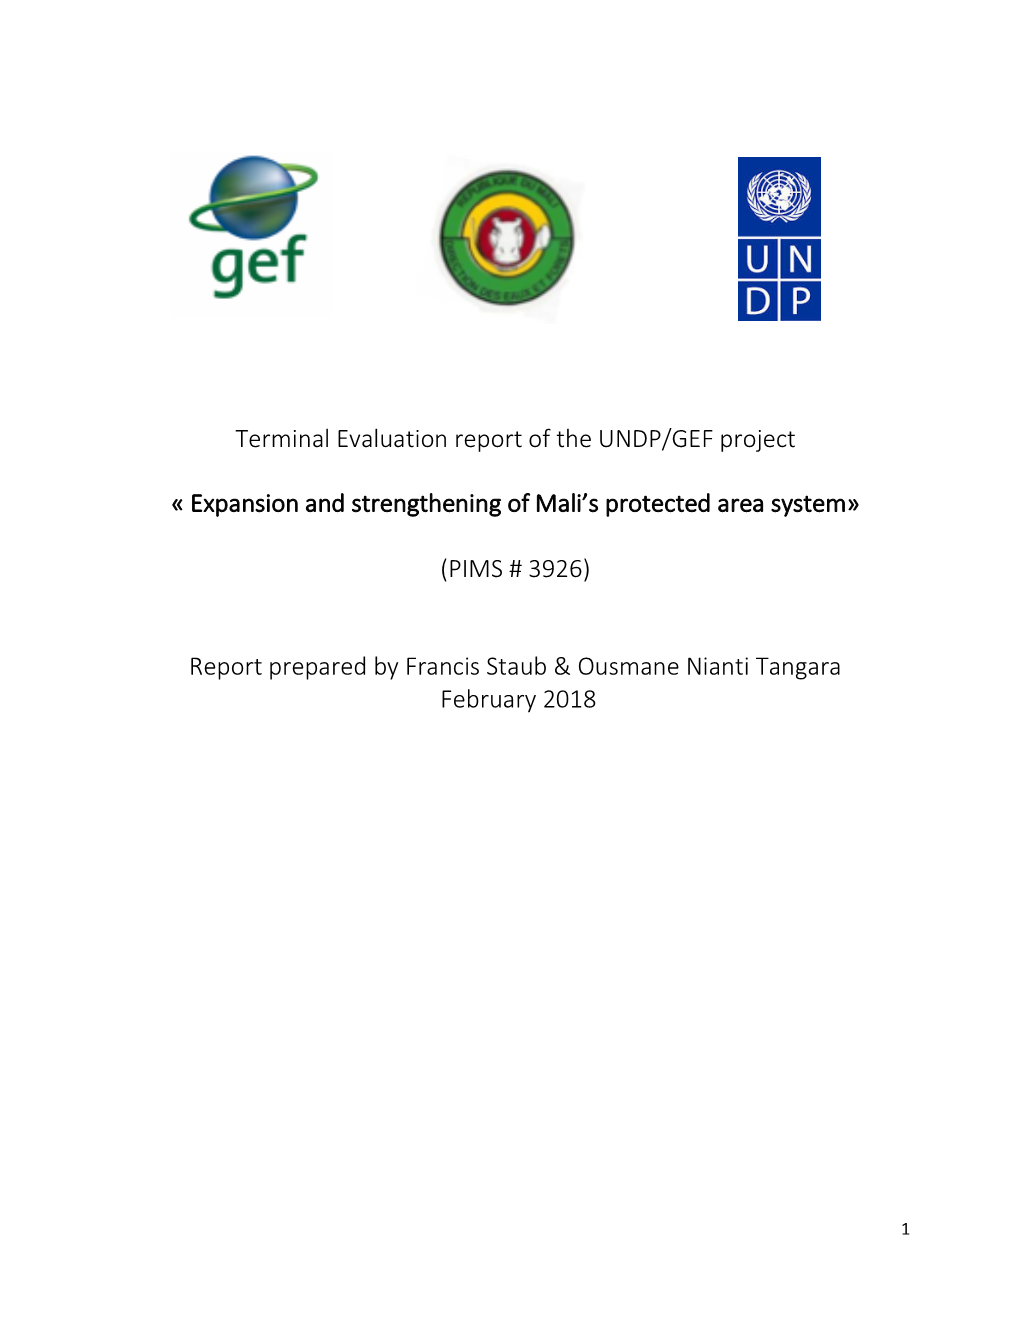 Terminal Evaluation Report of the UNDP/GEF Project